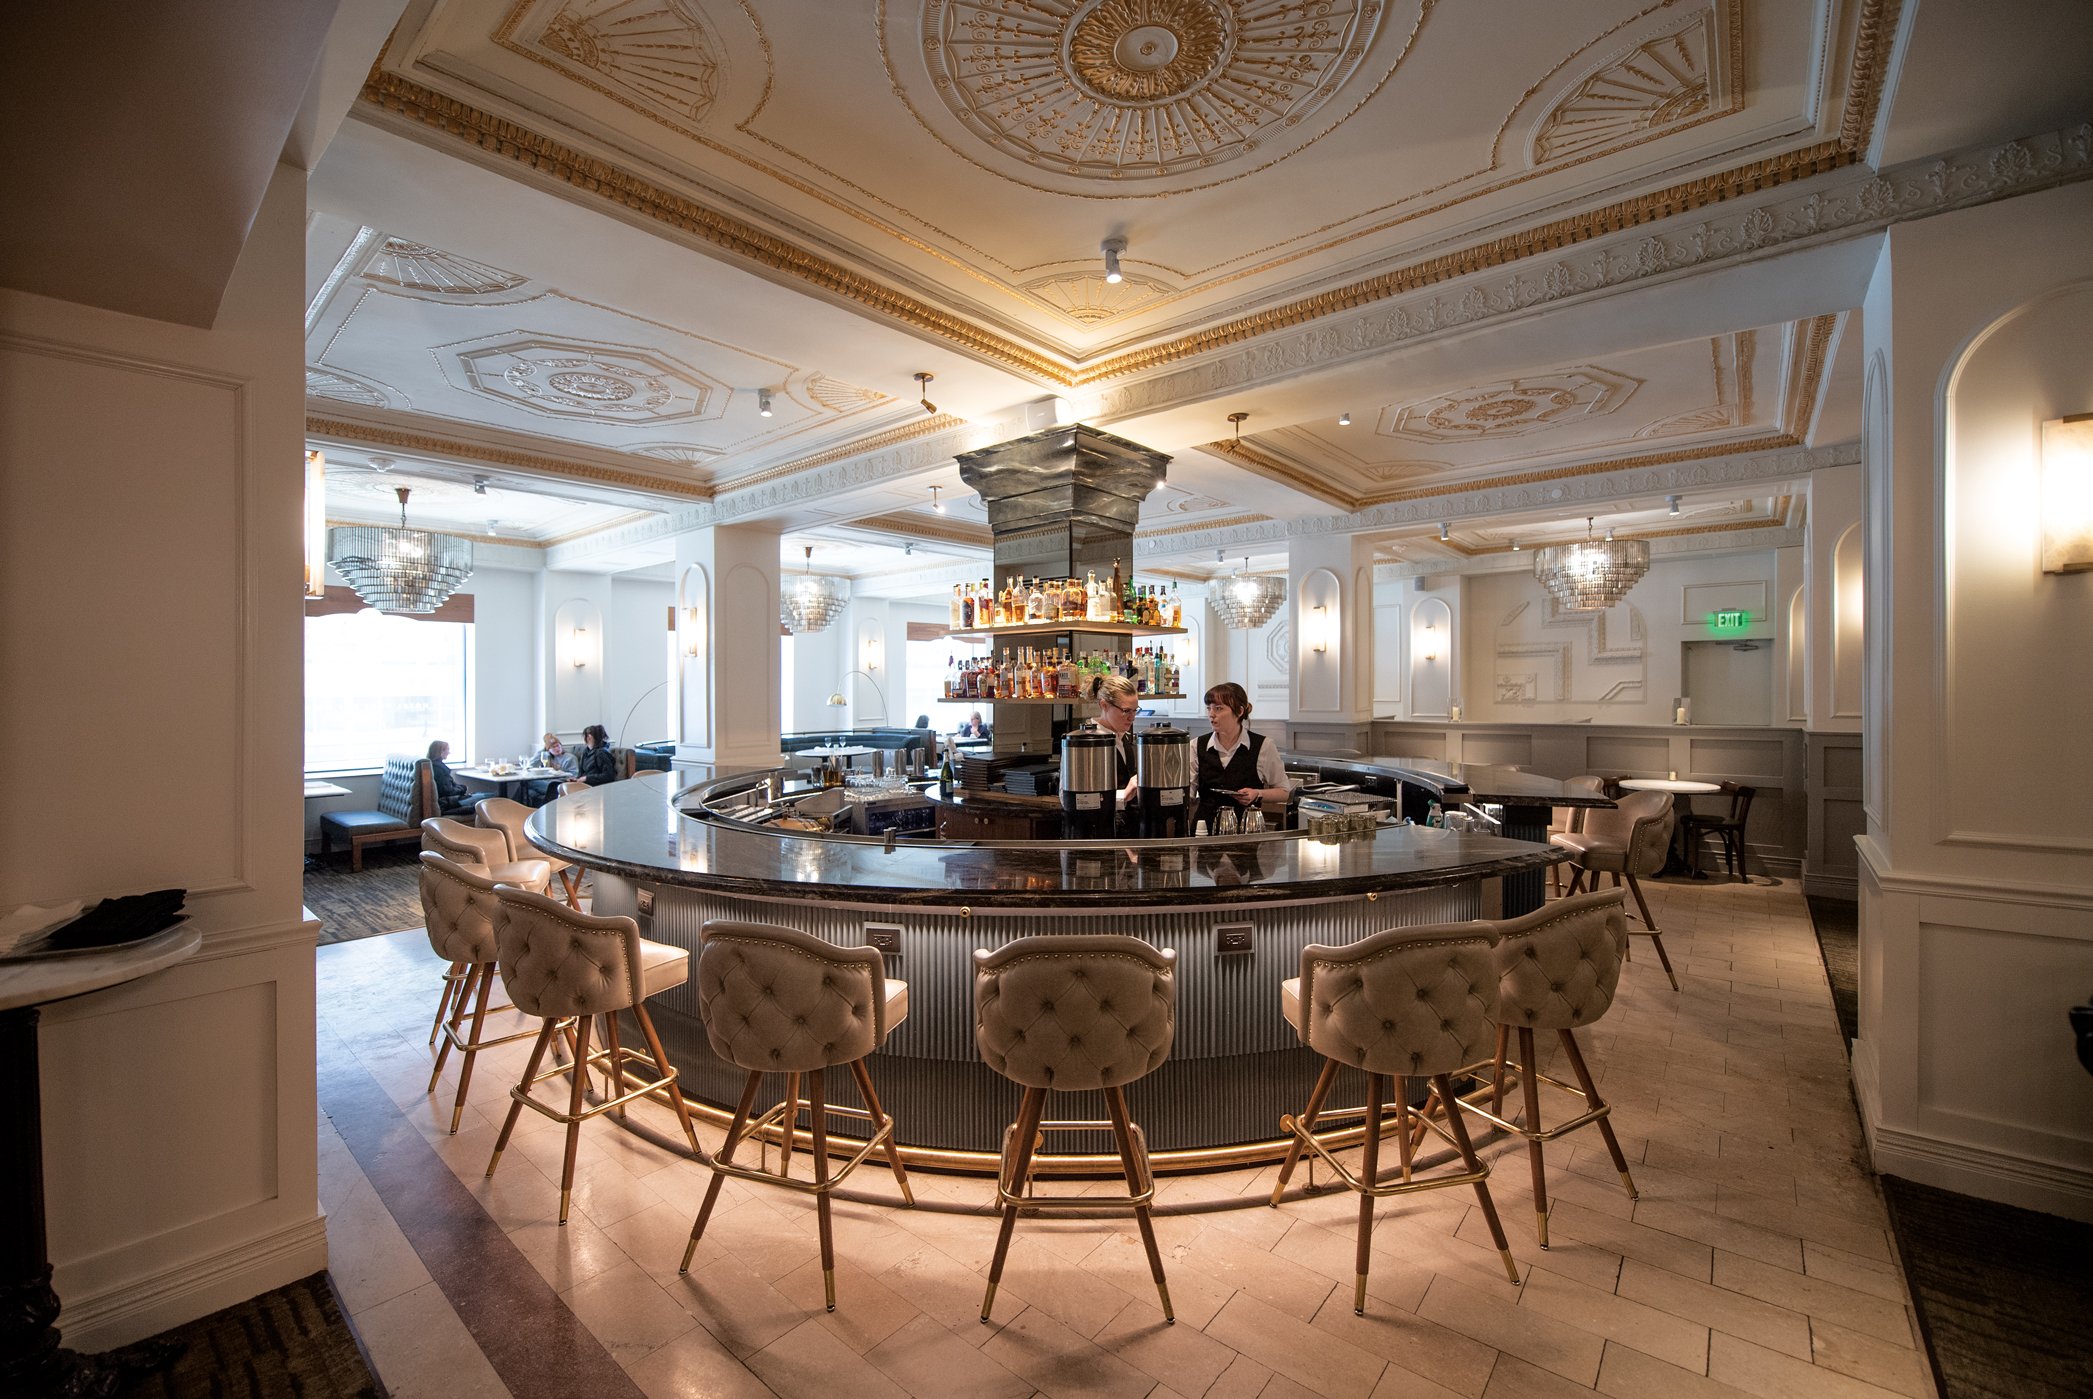  The restaurant Proudfoot and Bird at the Hotel Fort Des Moines is named after the architects who originally designed the building. “As you can see with my names and different things throughout the building, a lot of it was just a nod,” Patel said. “